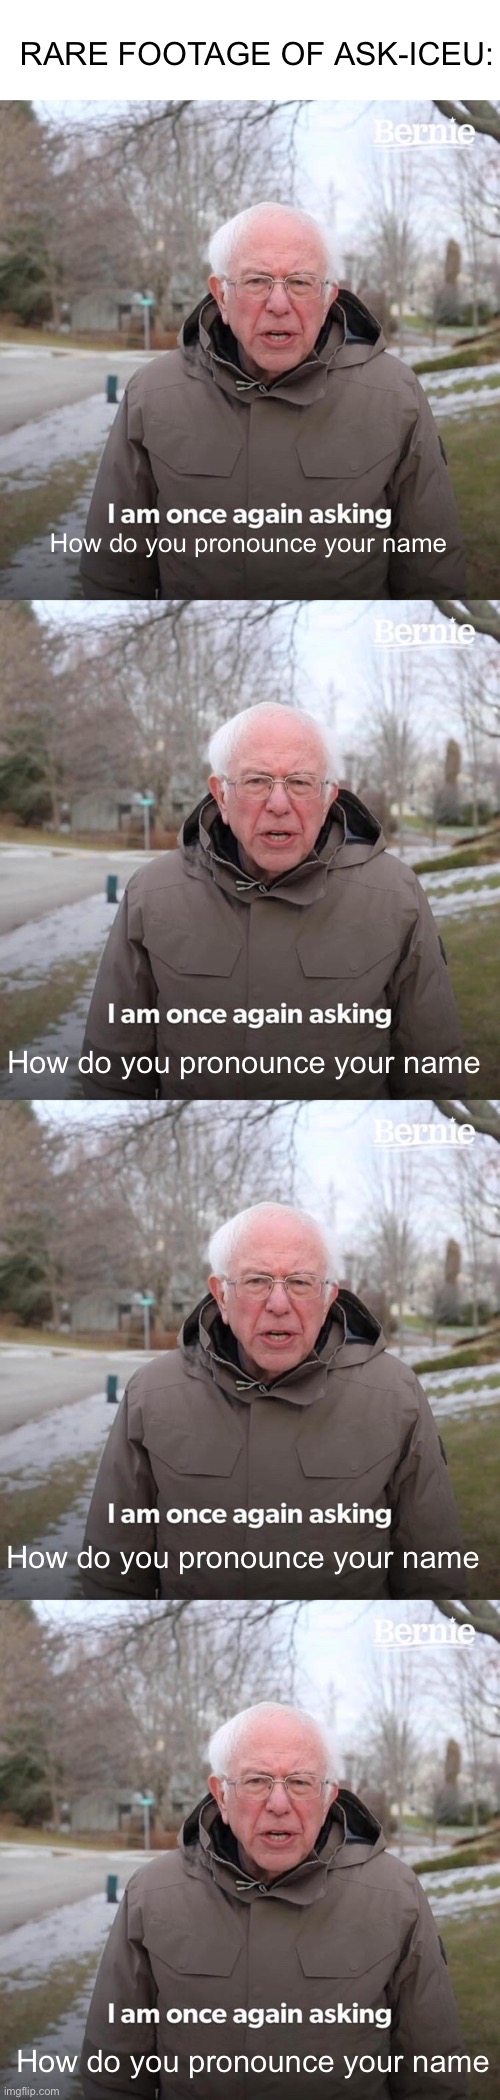 Meme #1,238 | RARE FOOTAGE OF ASK-ICEU:; How do you pronounce your name; How do you pronounce your name; How do you pronounce your name; How do you pronounce your name | image tagged in memes,bernie i am once again asking for your support,iceu,questions,repeat,names | made w/ Imgflip meme maker